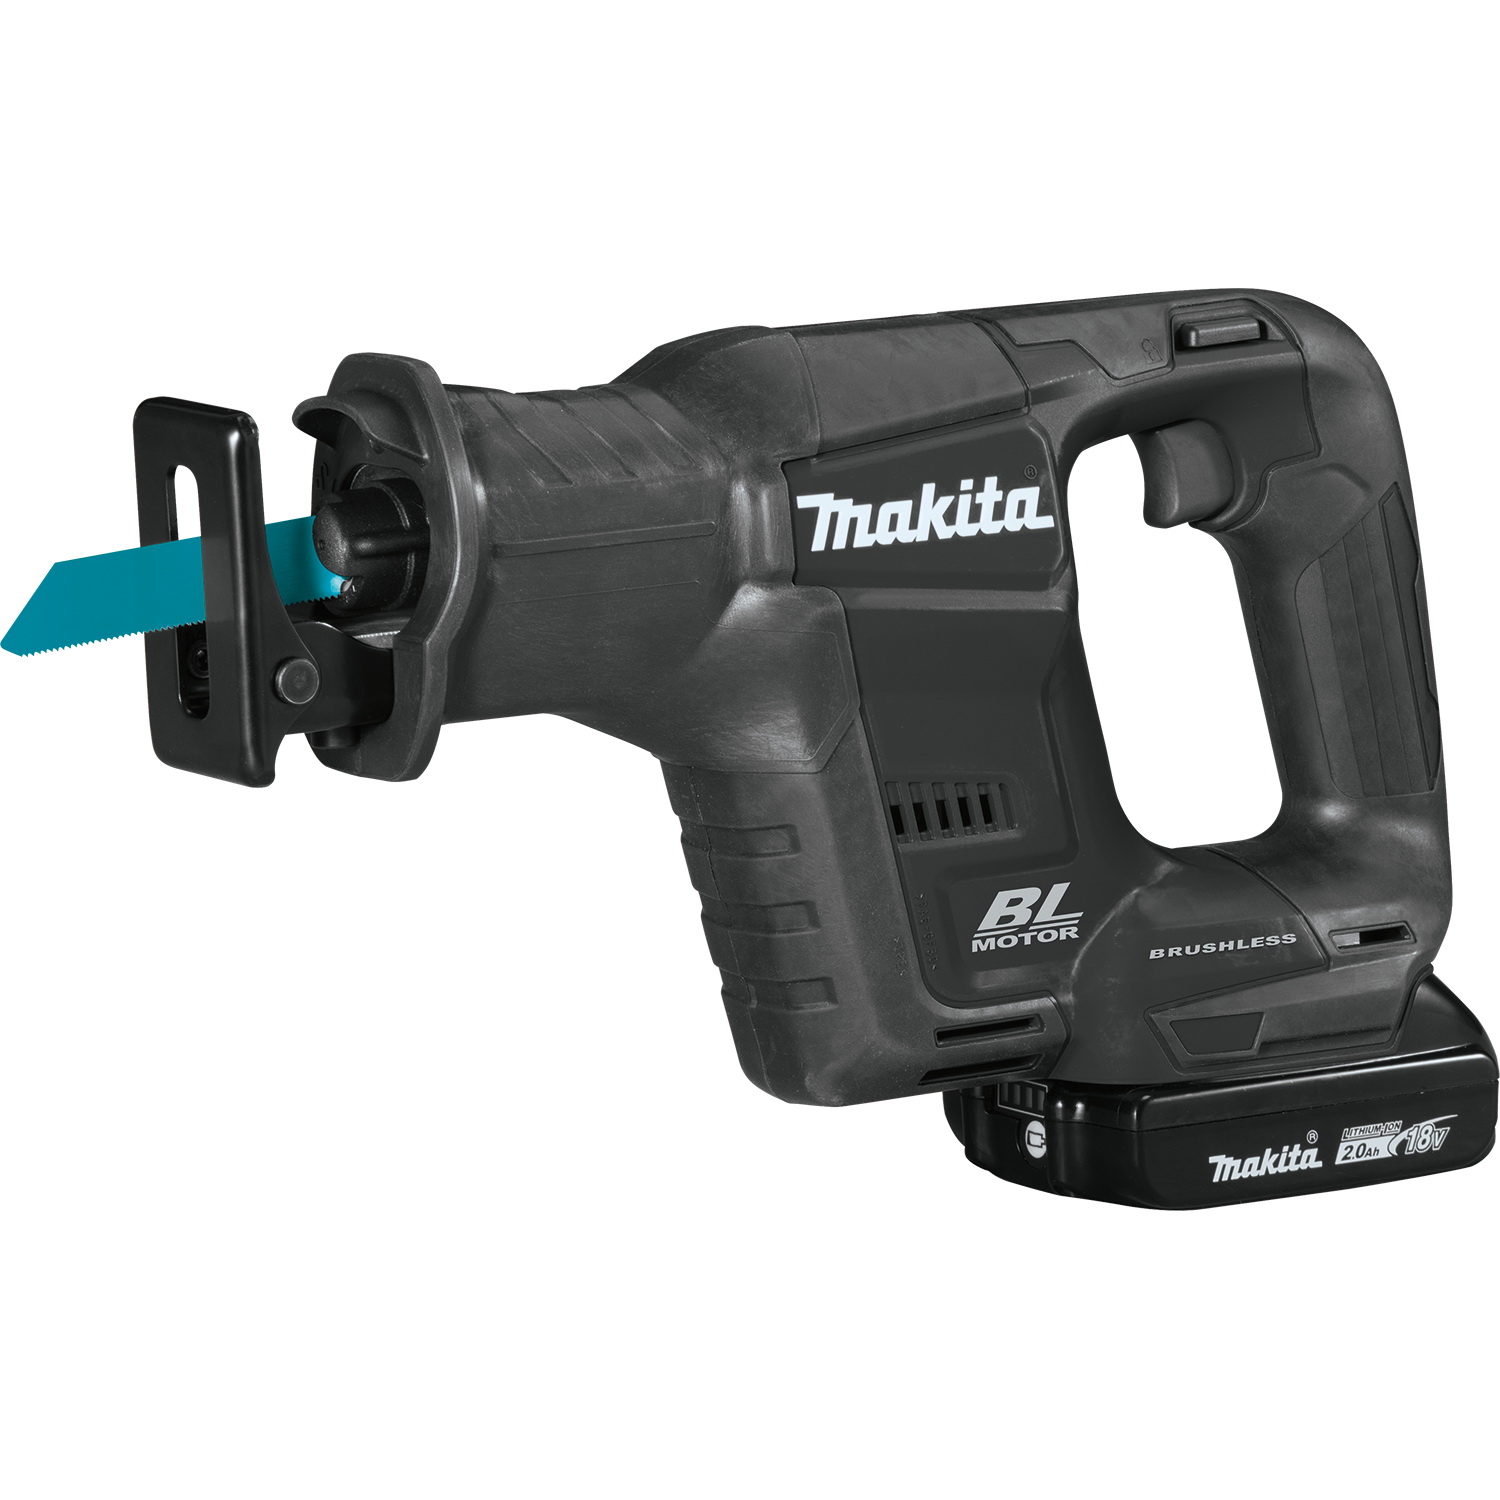 Makita XRJ07R1B Reciprocating Saw Kit, Battery Included, 18 V, 2 Ah, 5-1/8 in Pipe, 10 in Wood Cutting Capacity - 7